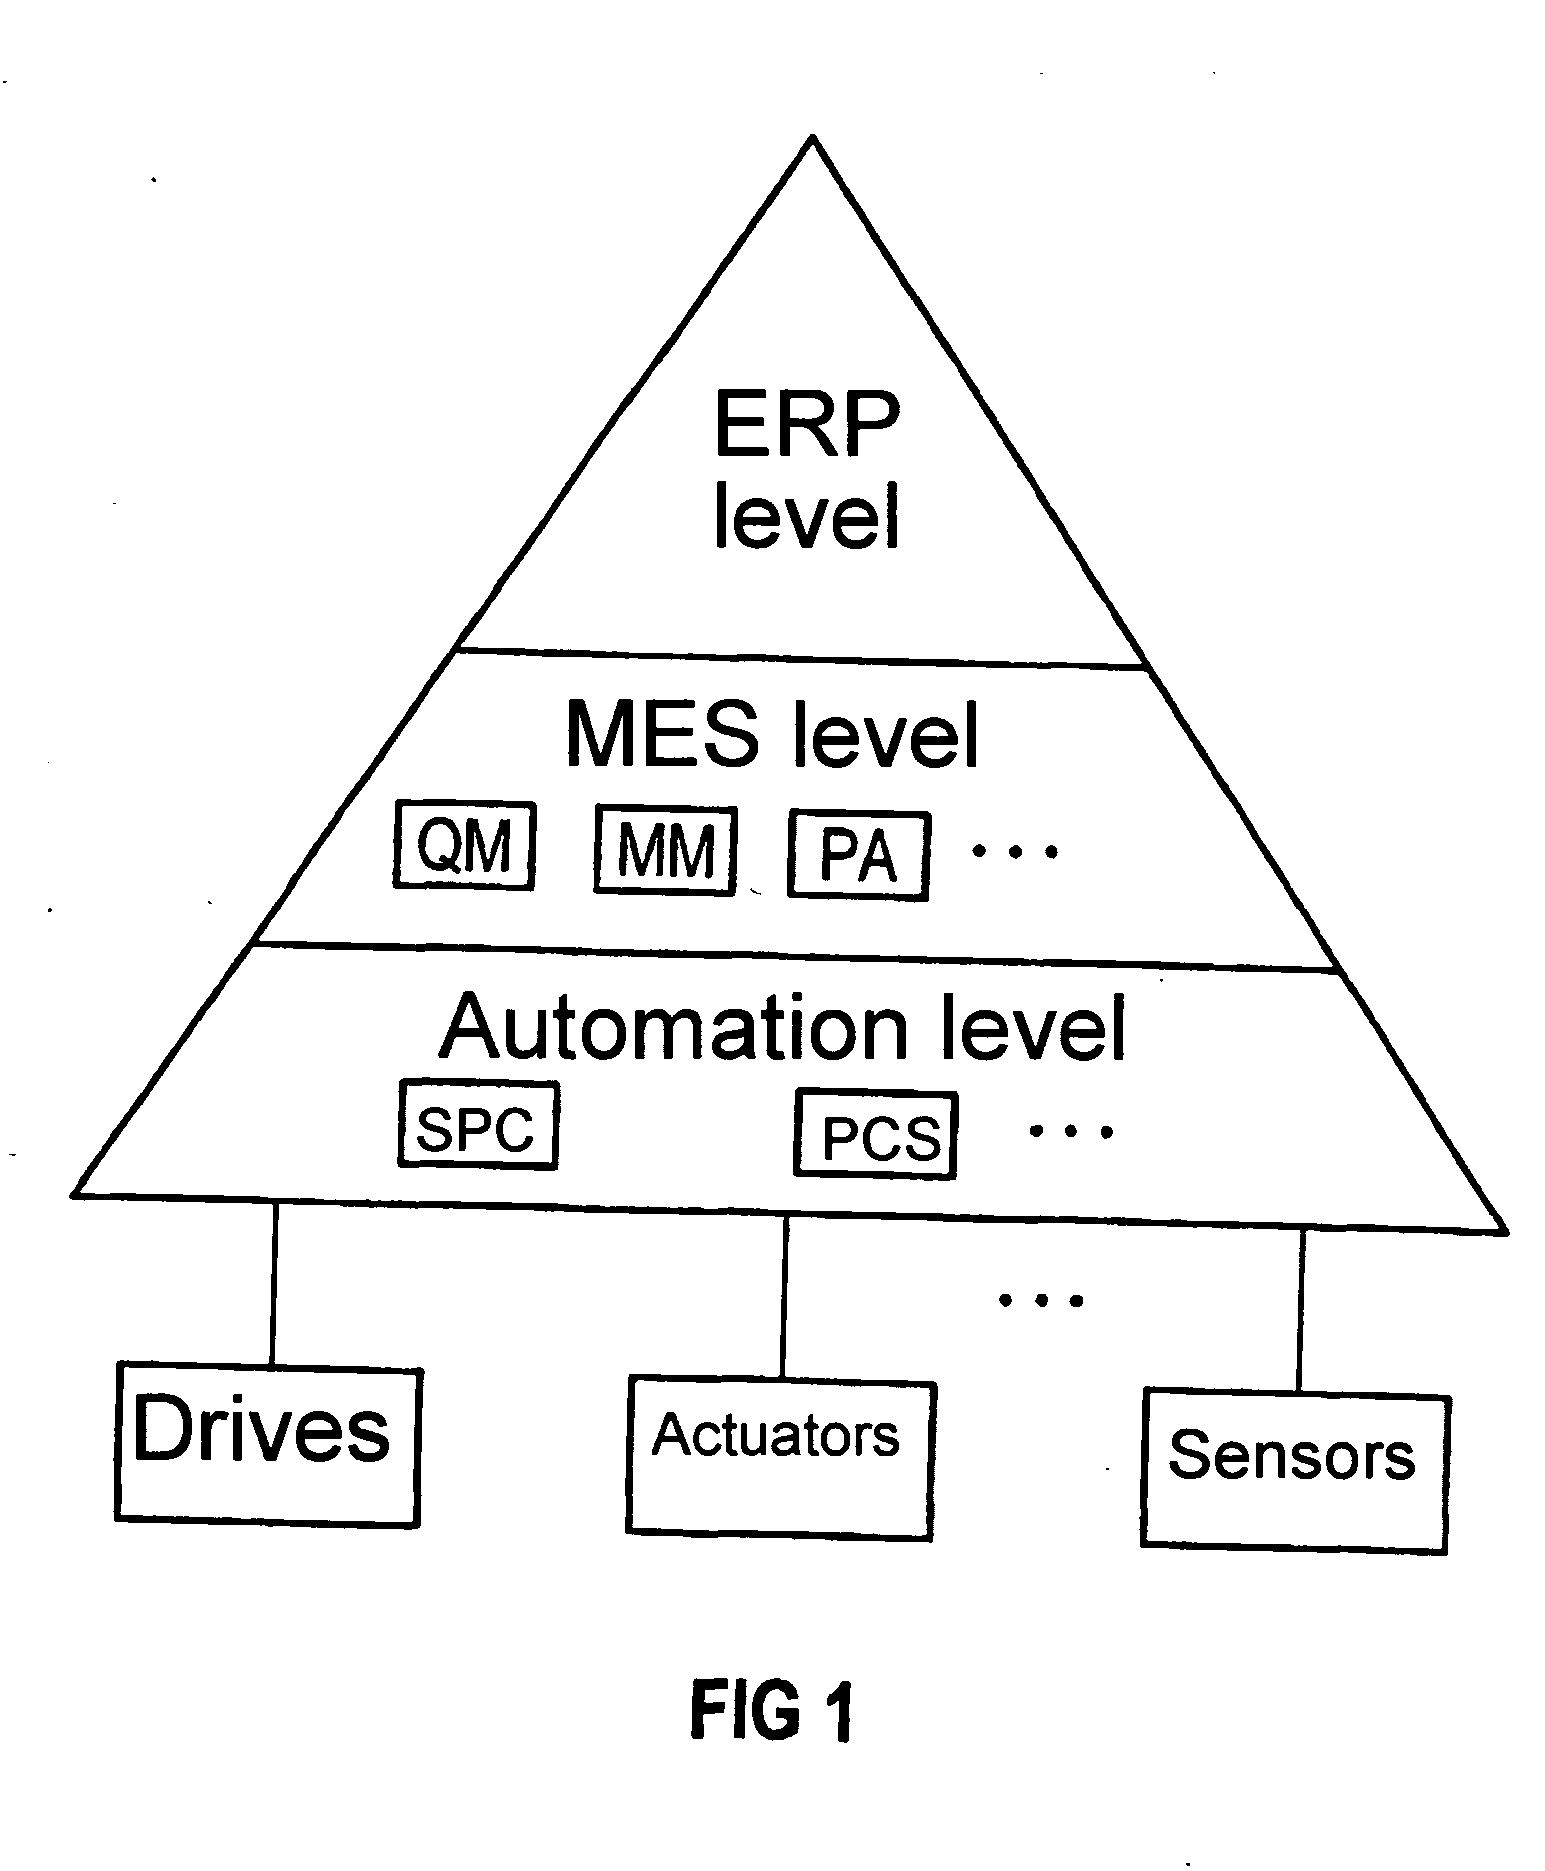 System and method for communicating between software applications, particularly mes (manufacturing execution system) applications